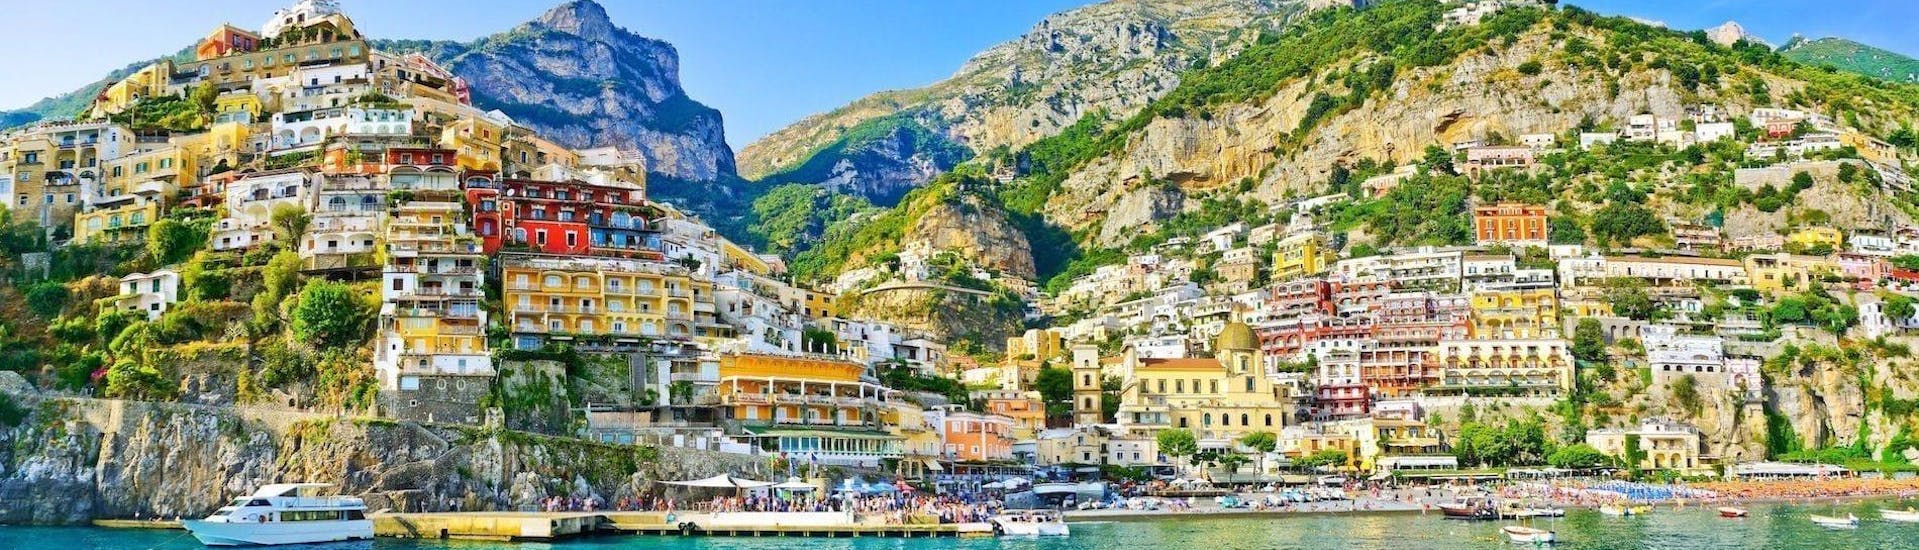 Amazing picture from the boat taken during the Eco Boat Trip to Positano, Amalfi and Baia di Ieranto.